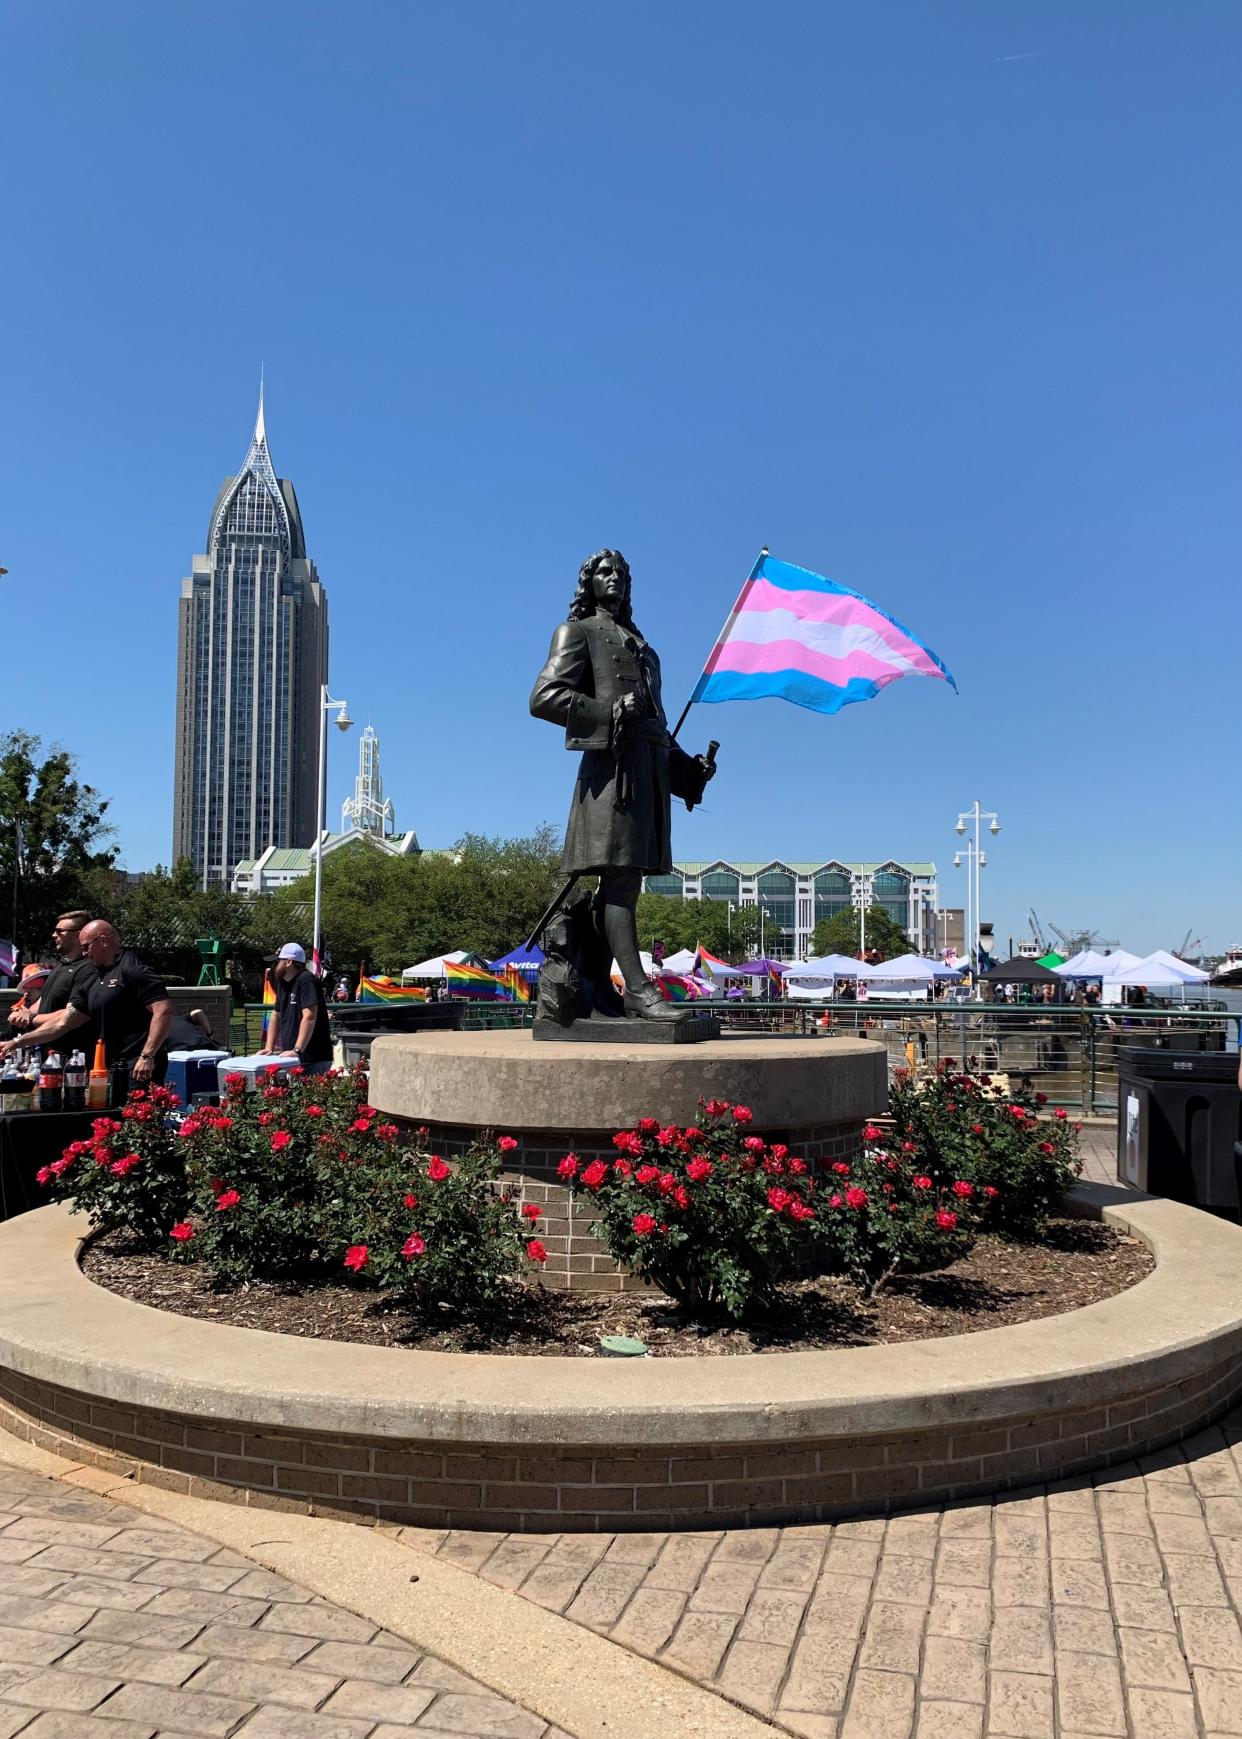 A transgender Pride flag unfurls in the wind during April's Pridefest in Mobile, Alabama. Booths and flags from the festival can be seen in the background.